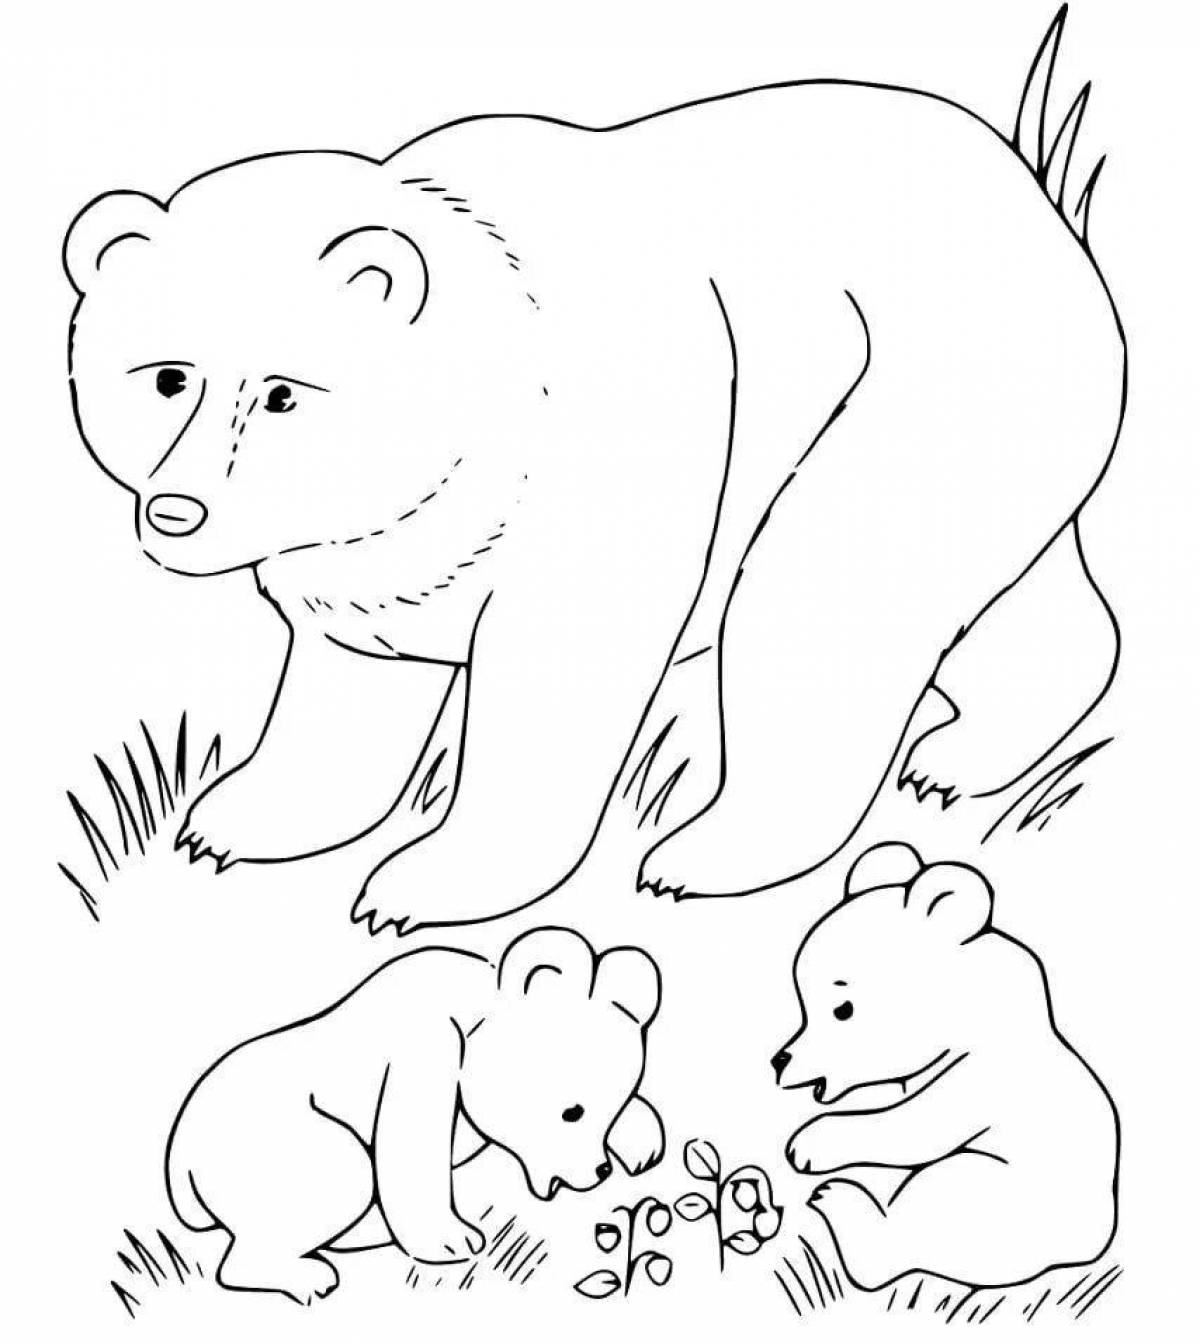 Coloring page cozy bear family